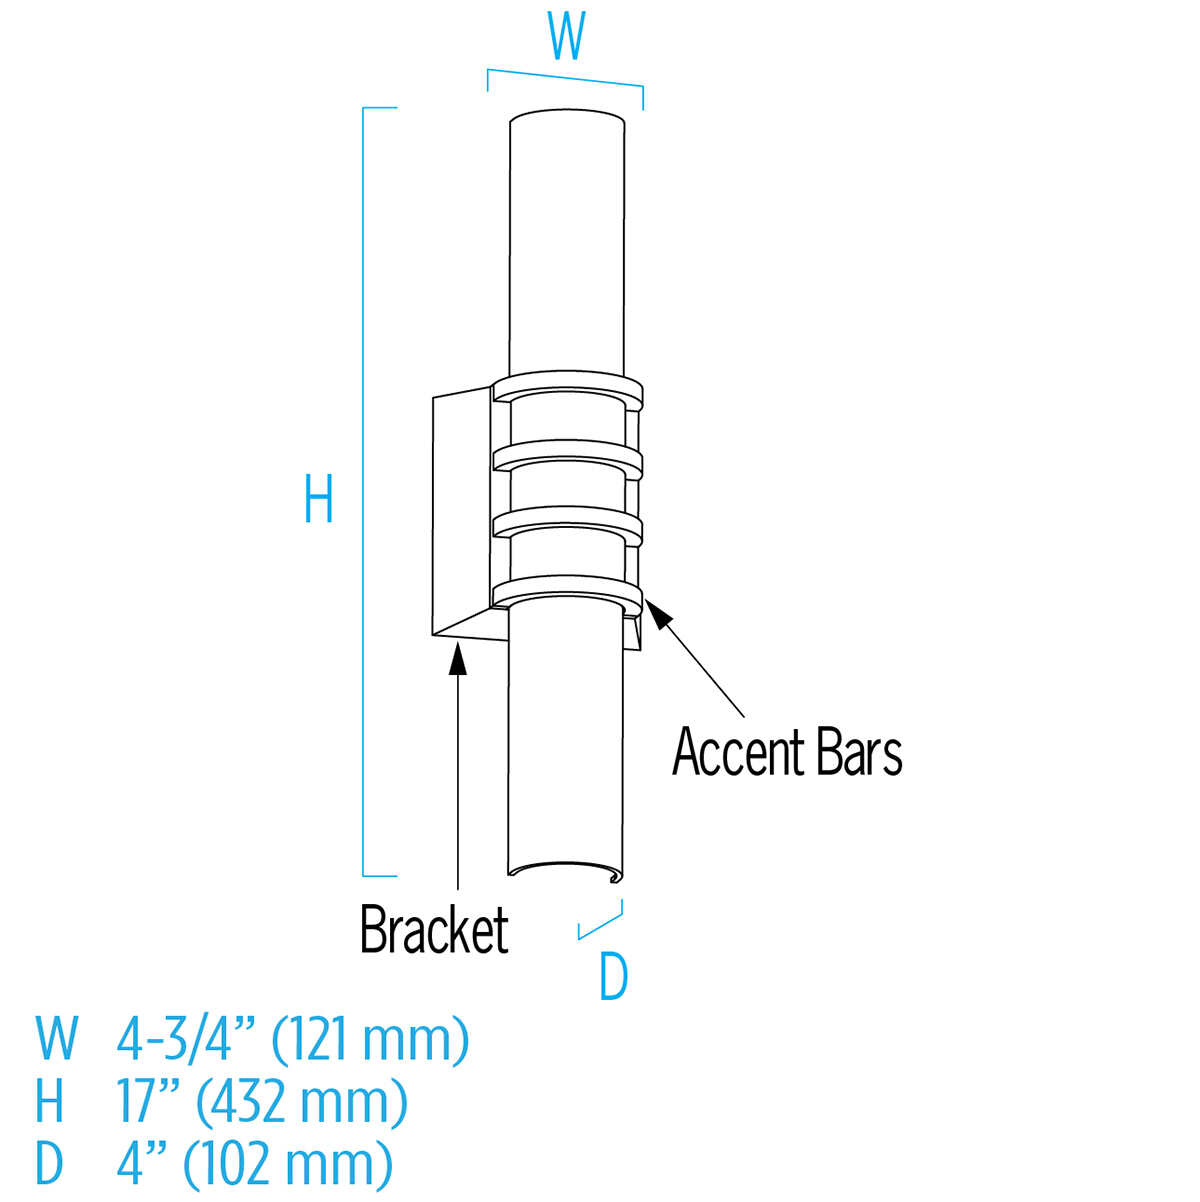 ISO drawing and dimensions for Mini Colonnade CB5110